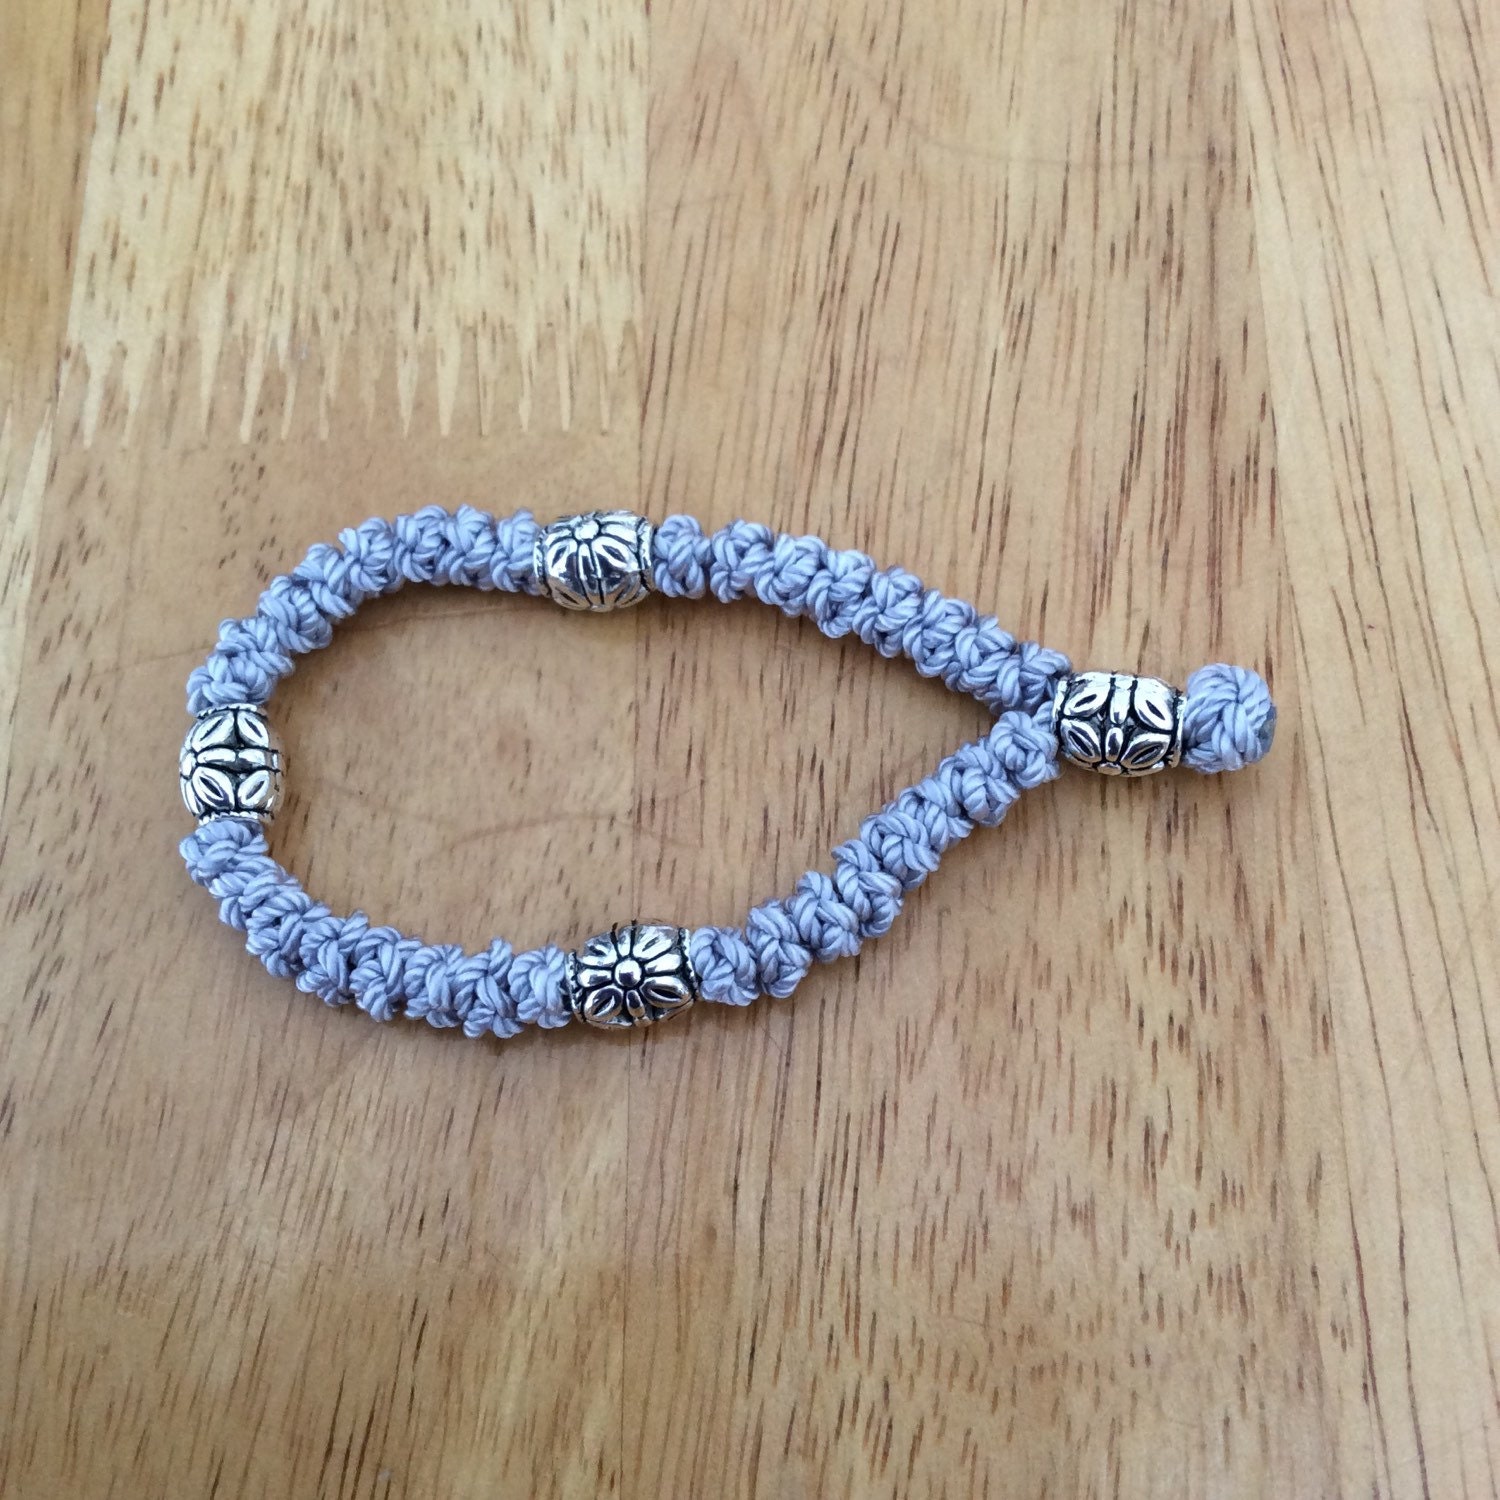 Gray Orthodox 33 Knot Prayer Rope Bracelet with Silver Bead